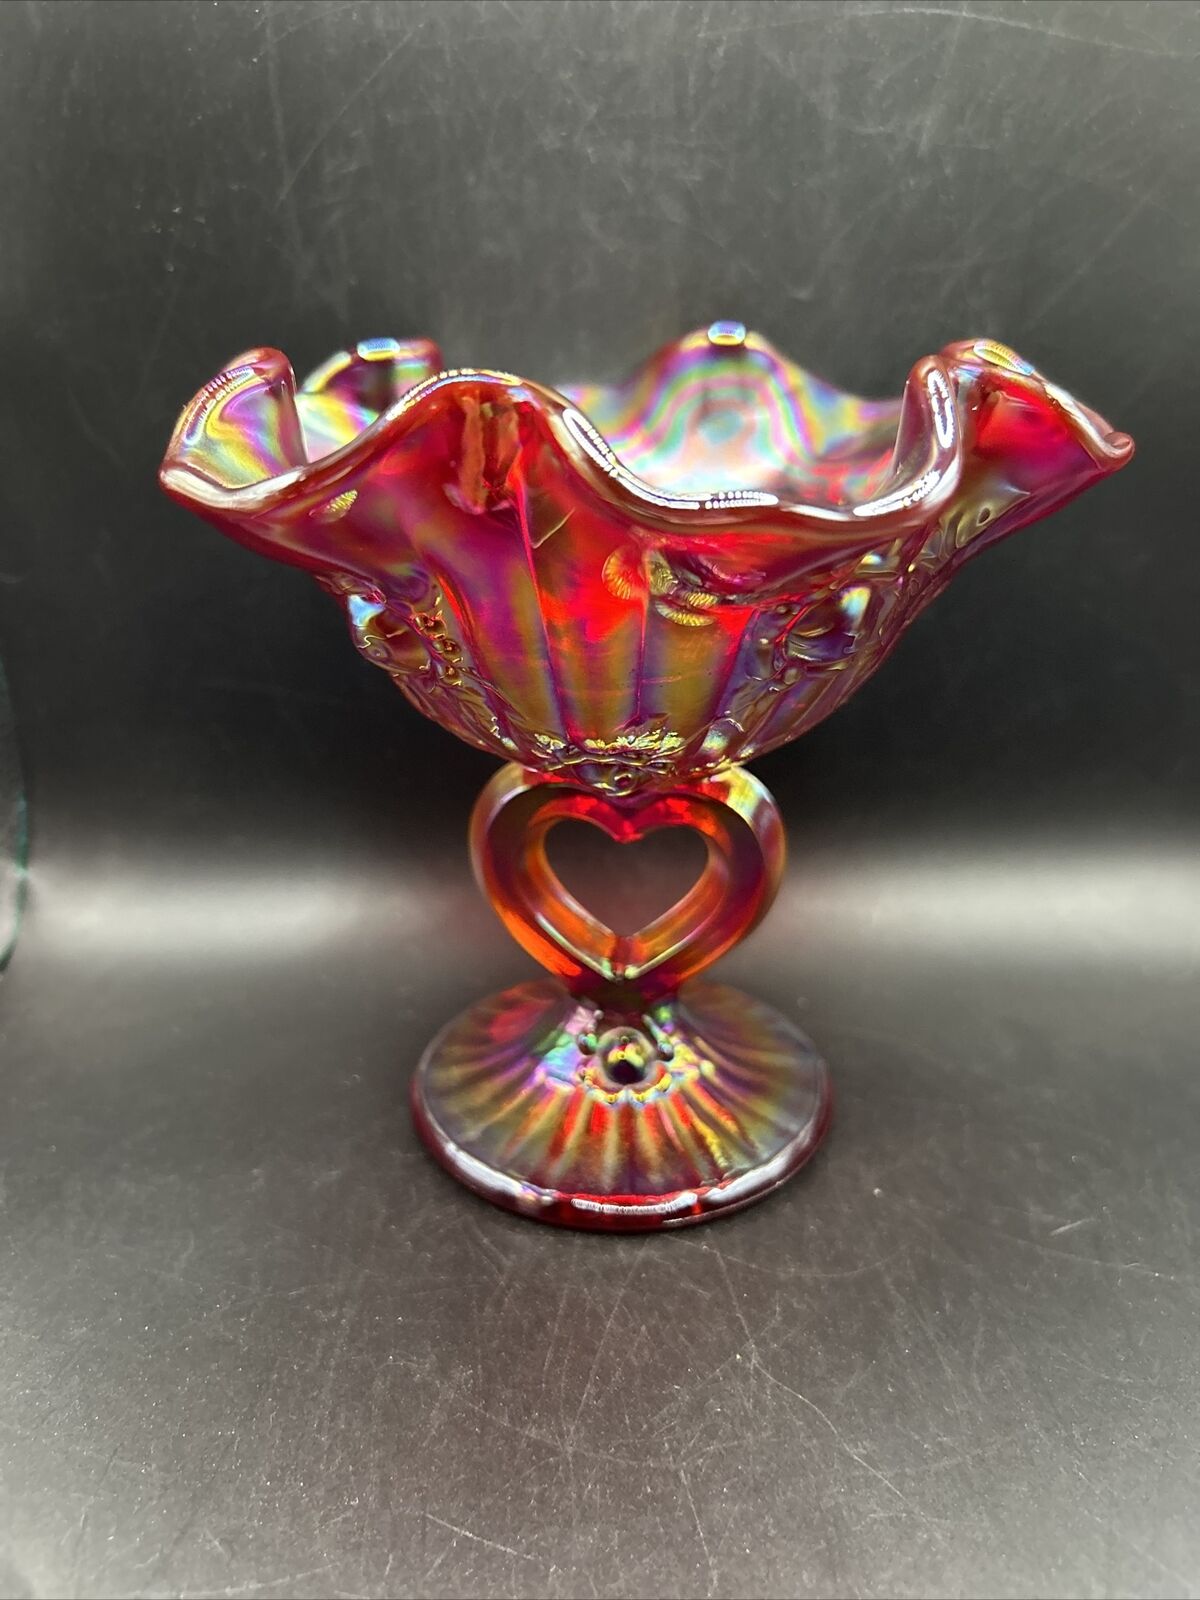 Vintage Fenton Carnival Iridescent Glass Candy Dish Ruby Red Ruffled. DWK Glows